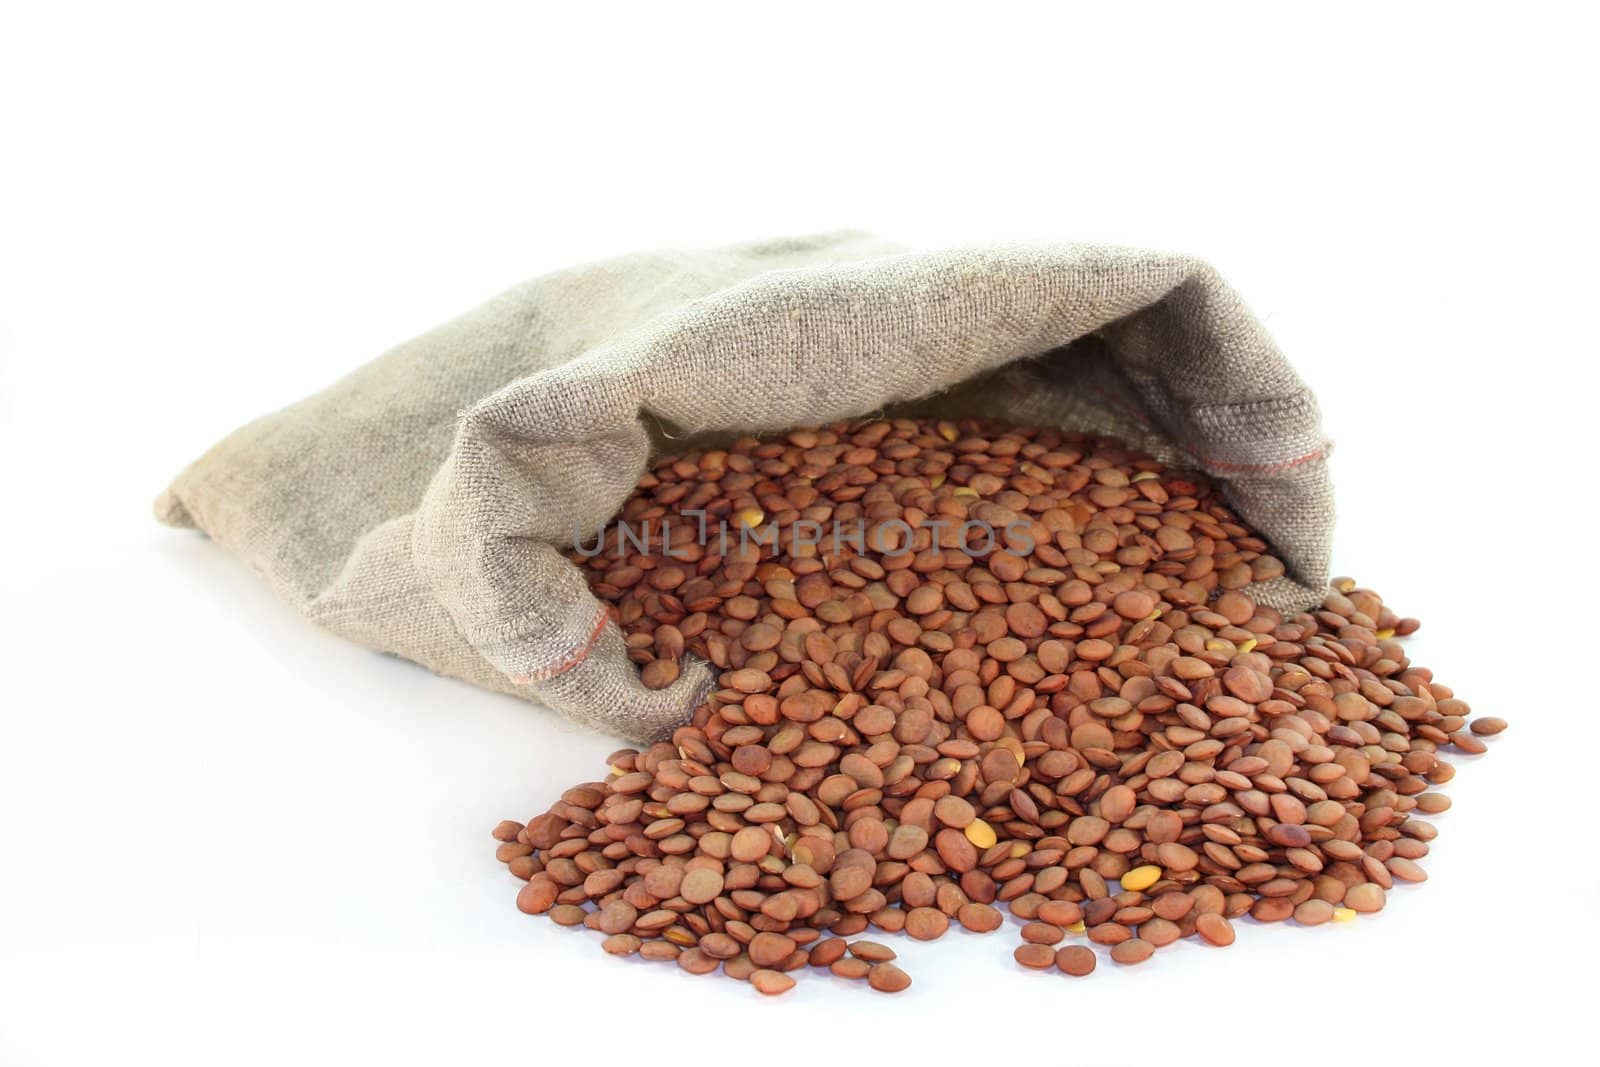 dried lentils in a jute sack on a white background